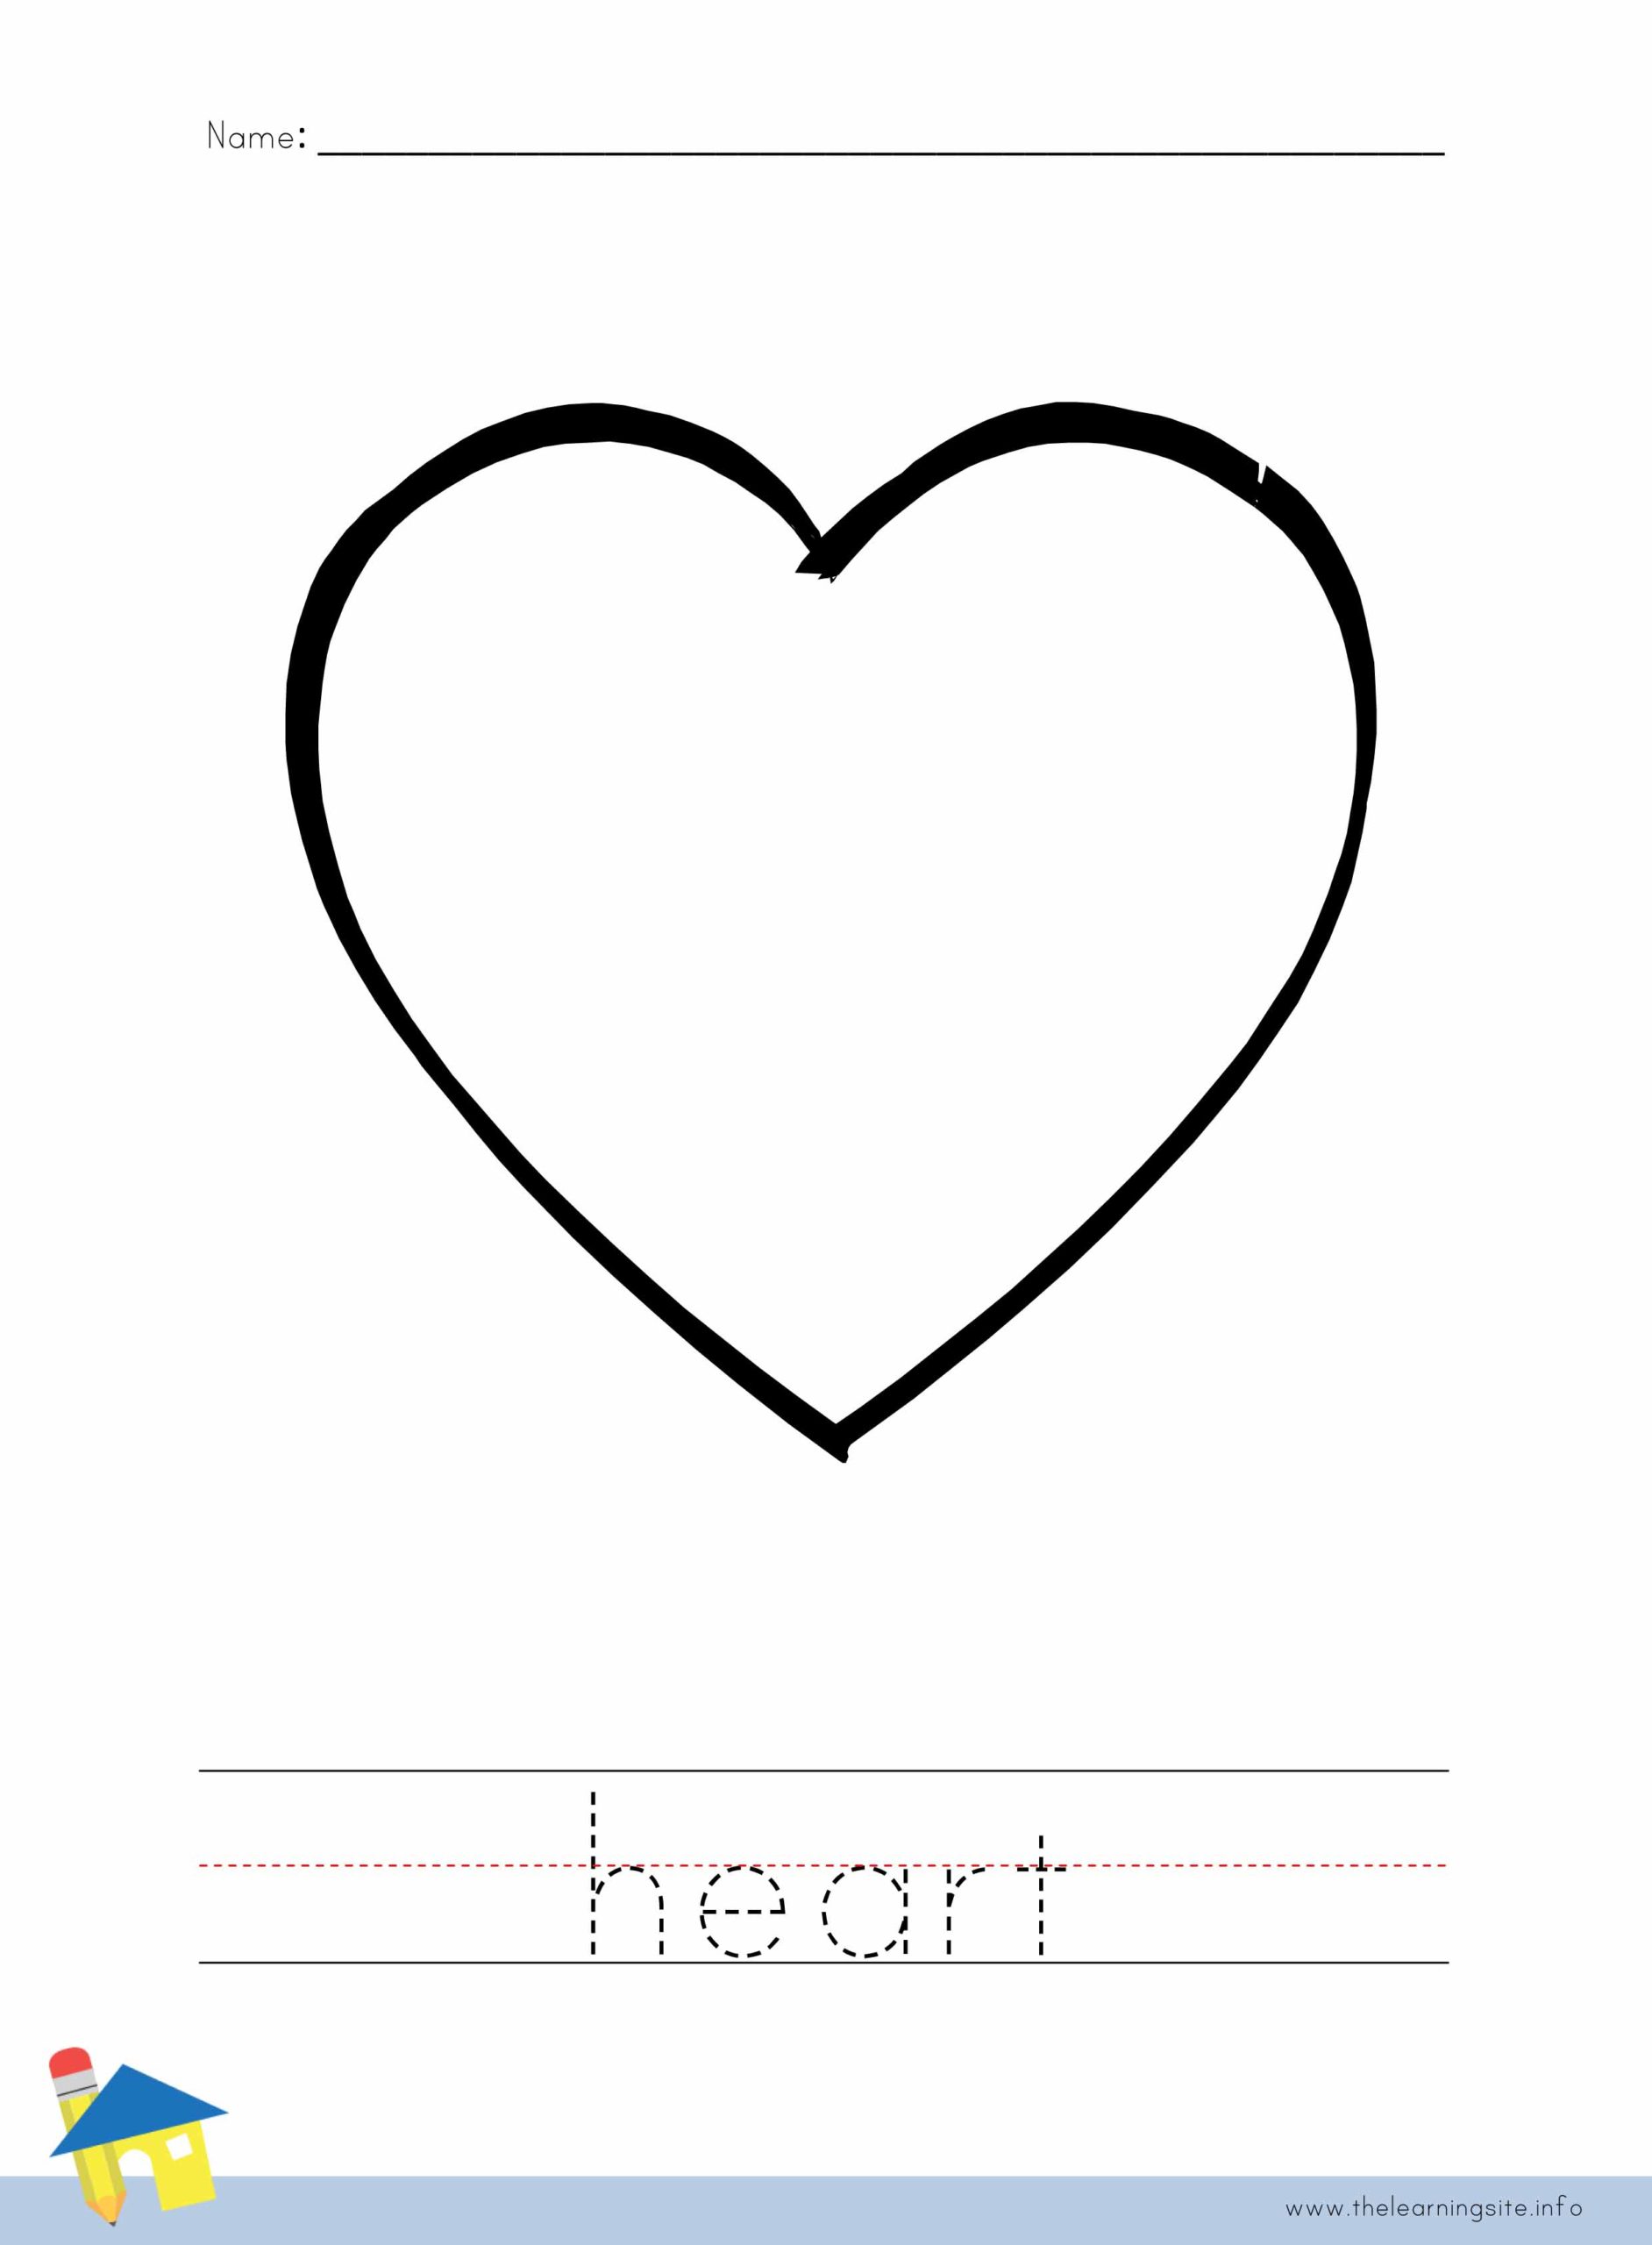 Heart Coloring Worksheet – The Learning Site